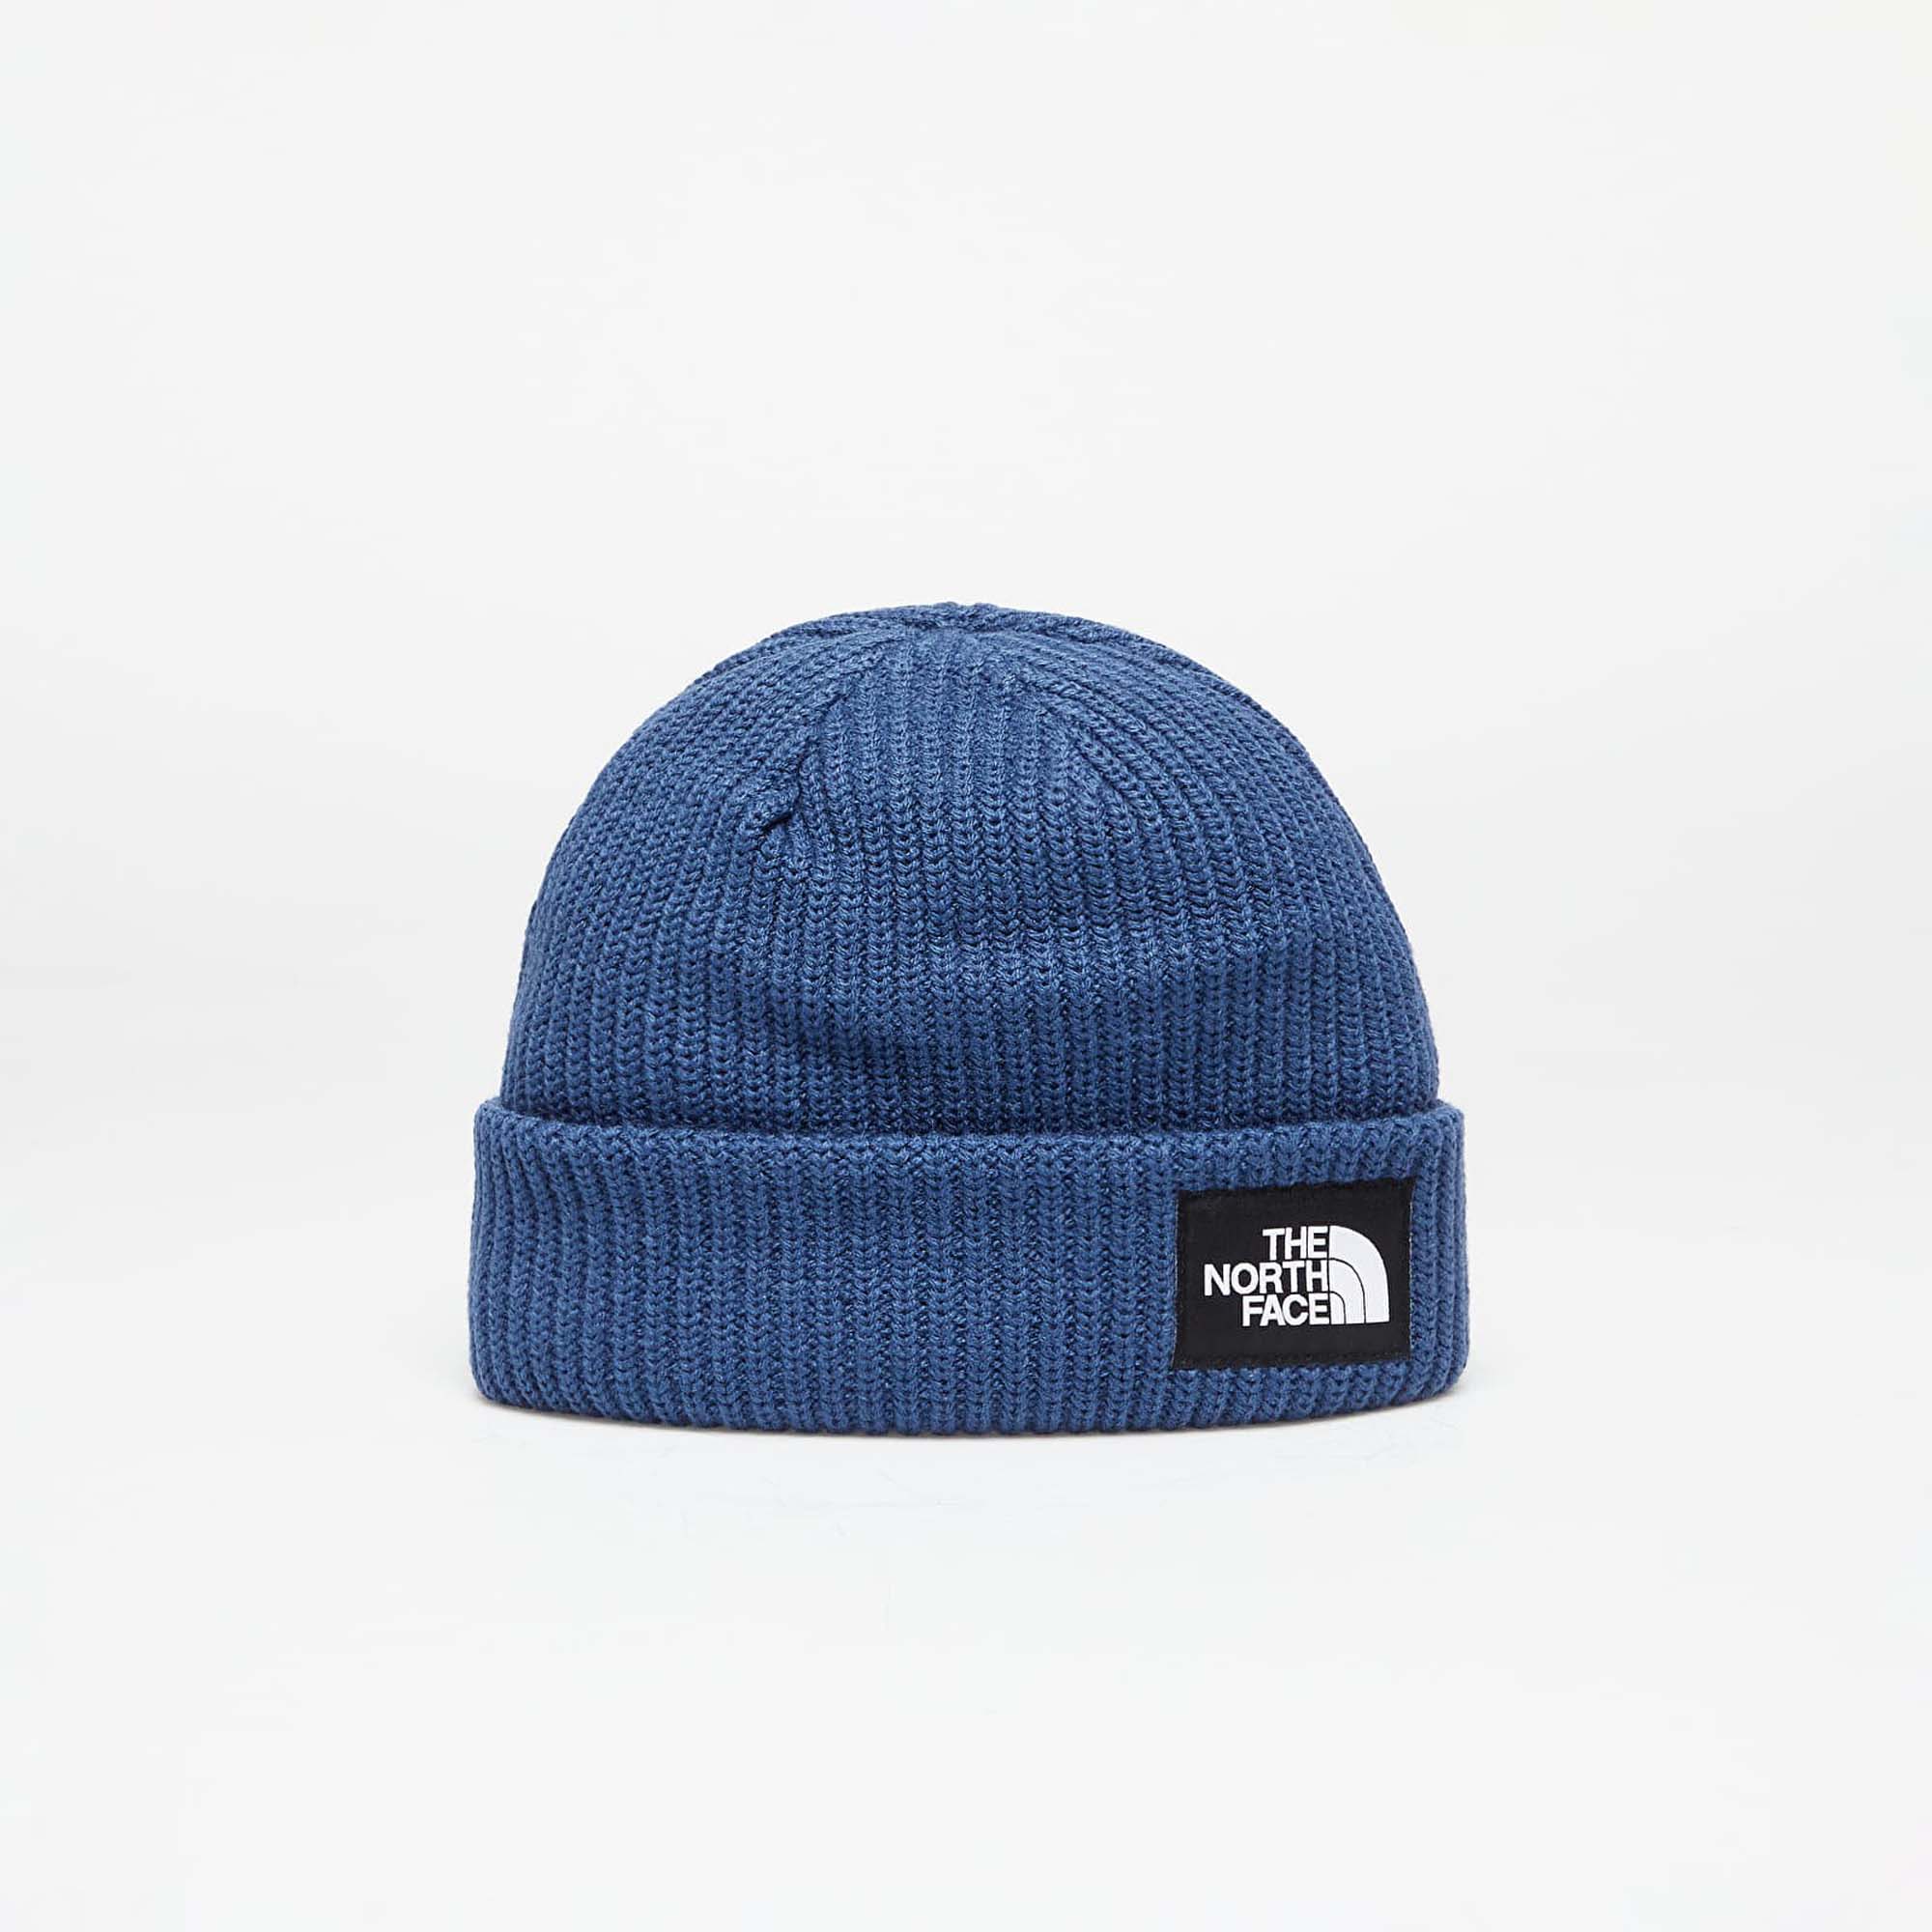 THE NORTH FACE salty dog beanie